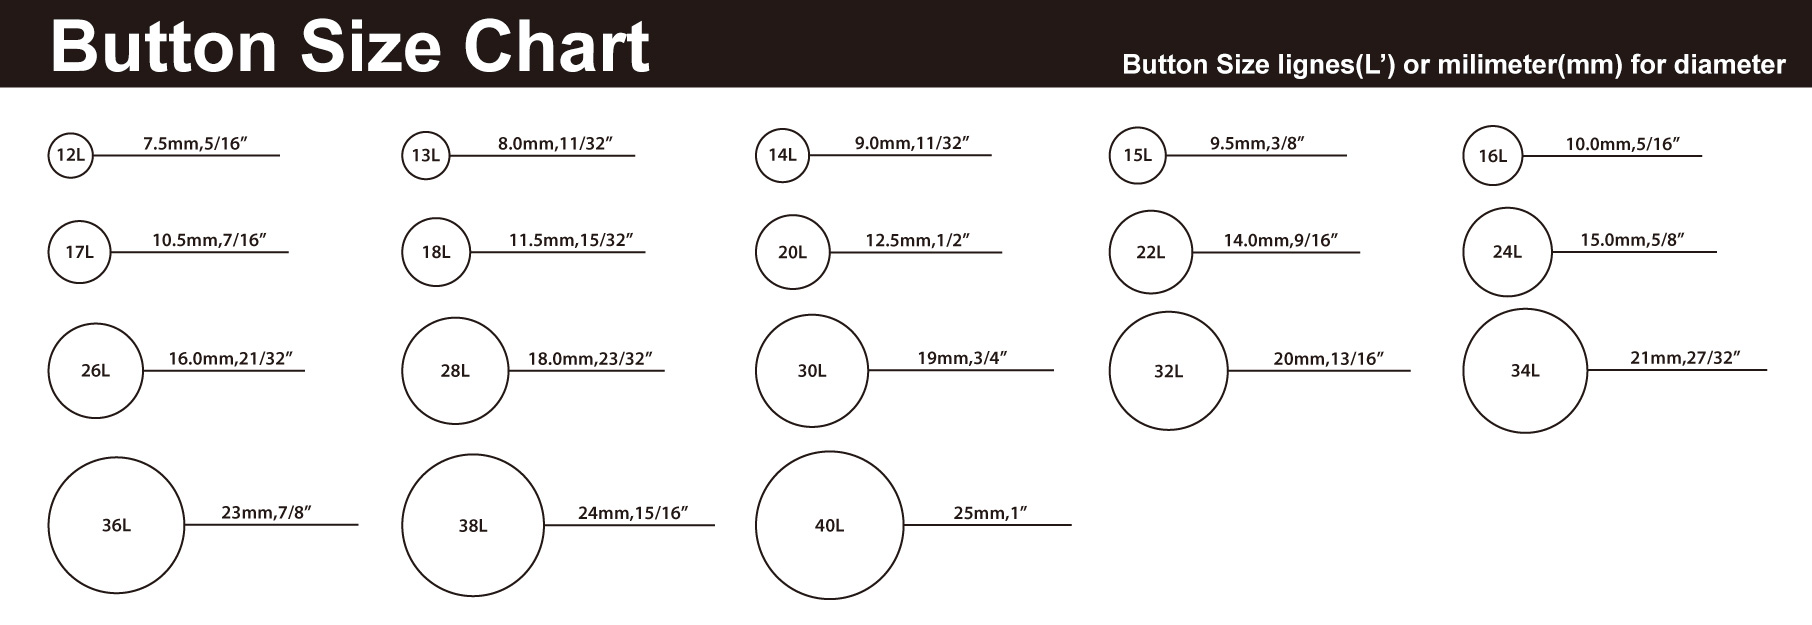 Button Size Chart Showing Different Sizes Of Buttons Shadow Box Images